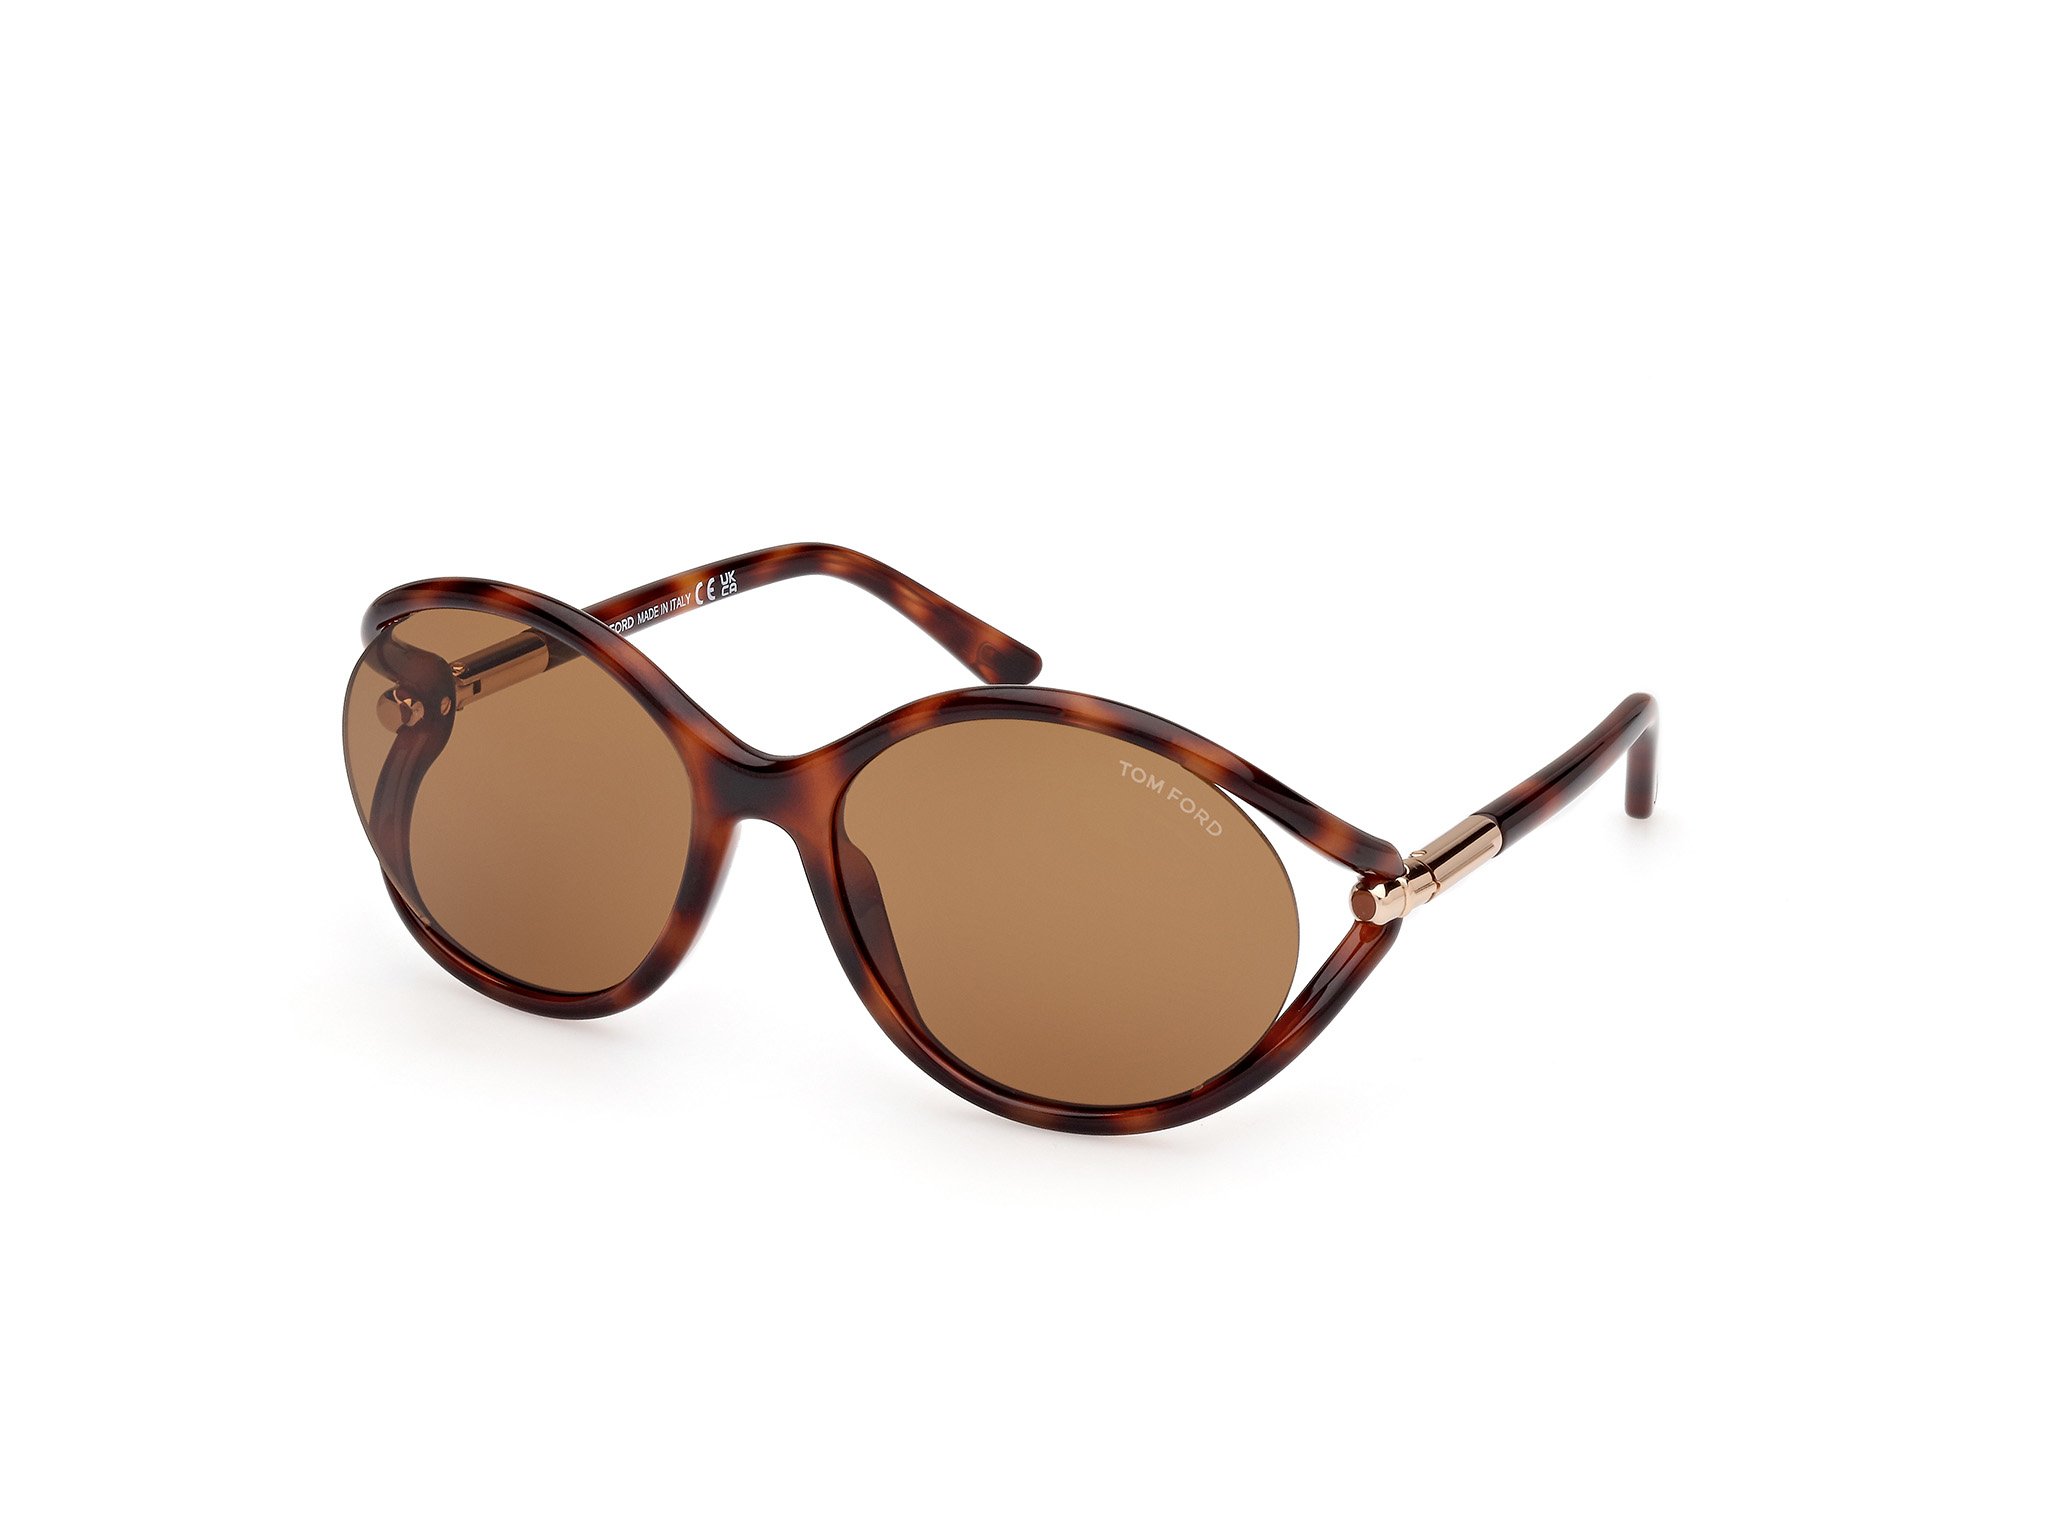  Tom Ford Sonnenbrille Melody in havanna FT1090 53E